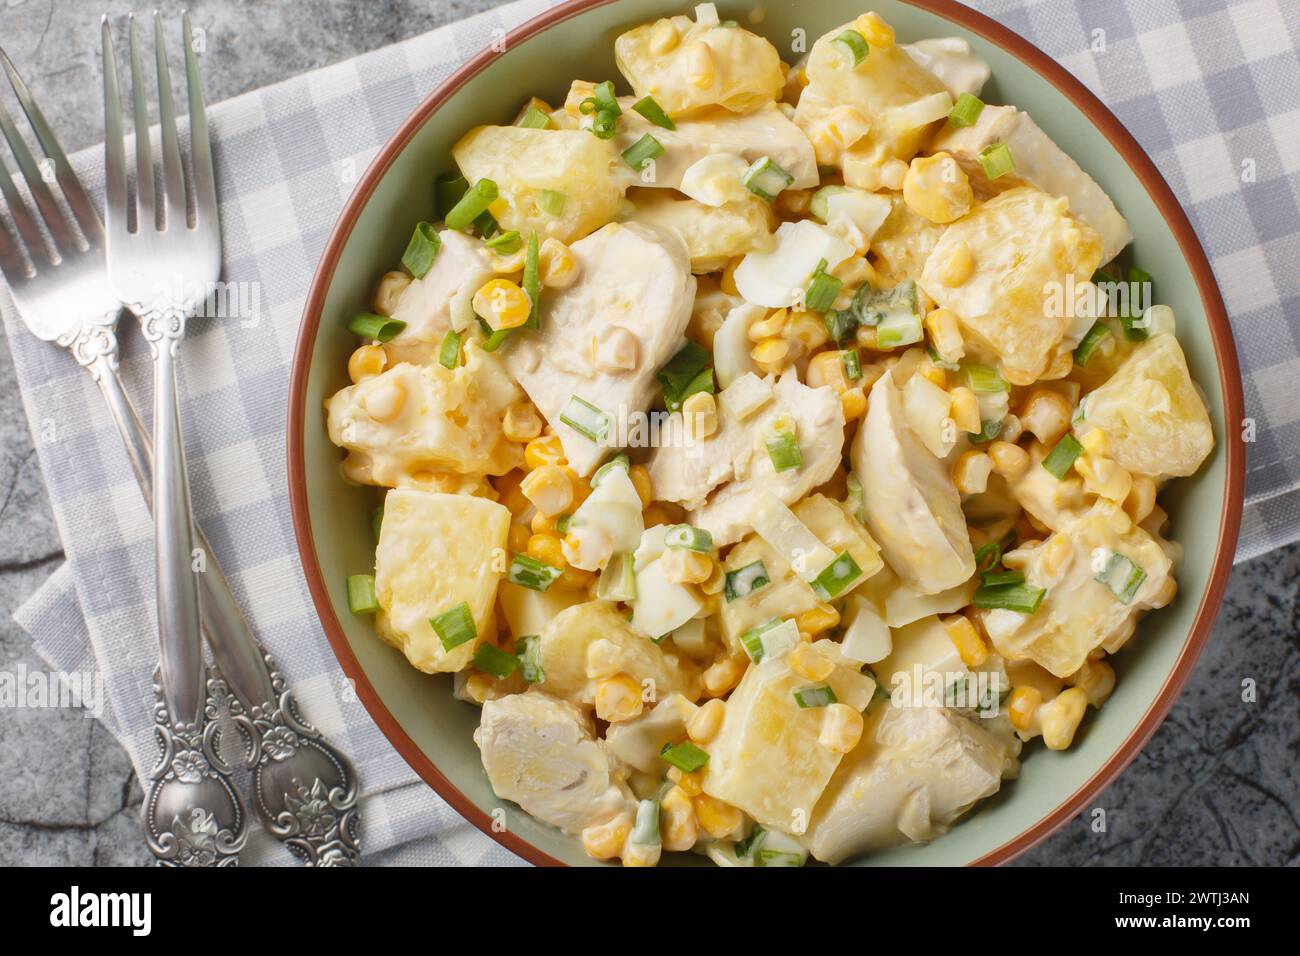 Festive Chicken salad with fresh pineapple, corn, cheese, eggs and onions dressed with mayonnaise close-up in a plate on the table. Horizontal top vie Stock Photo